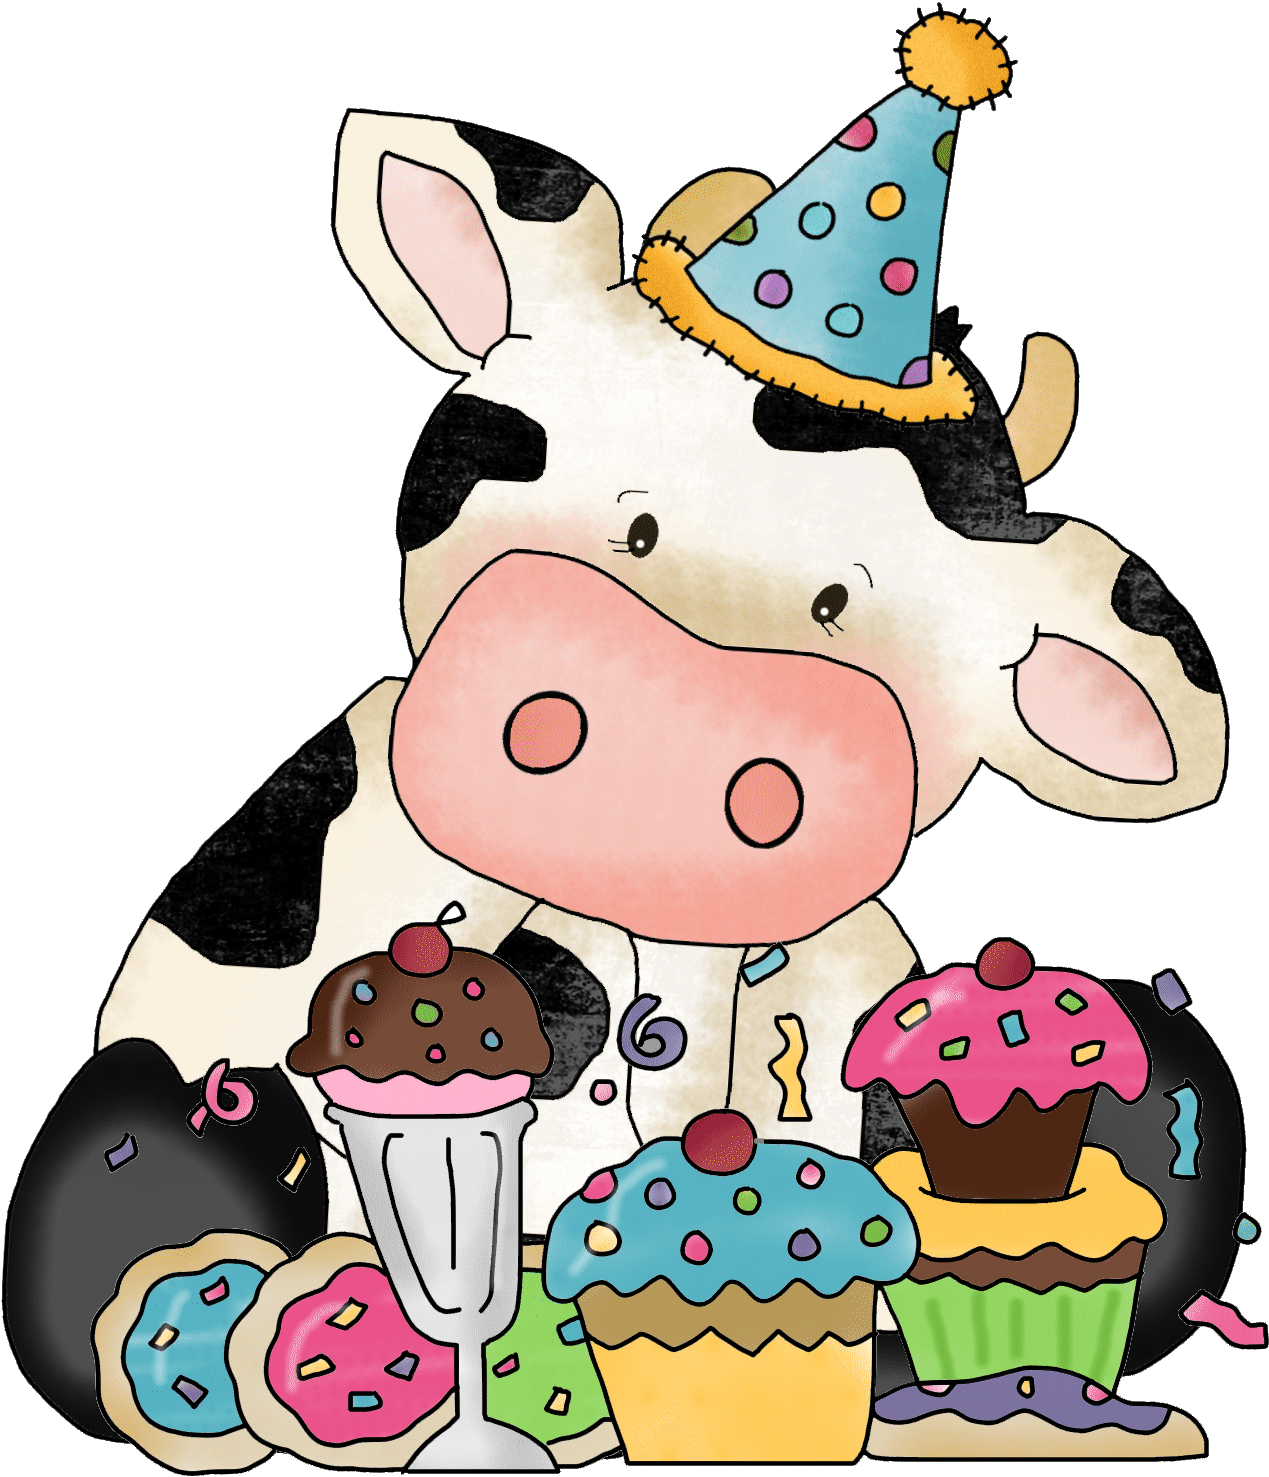  best images on. Clipart food cow